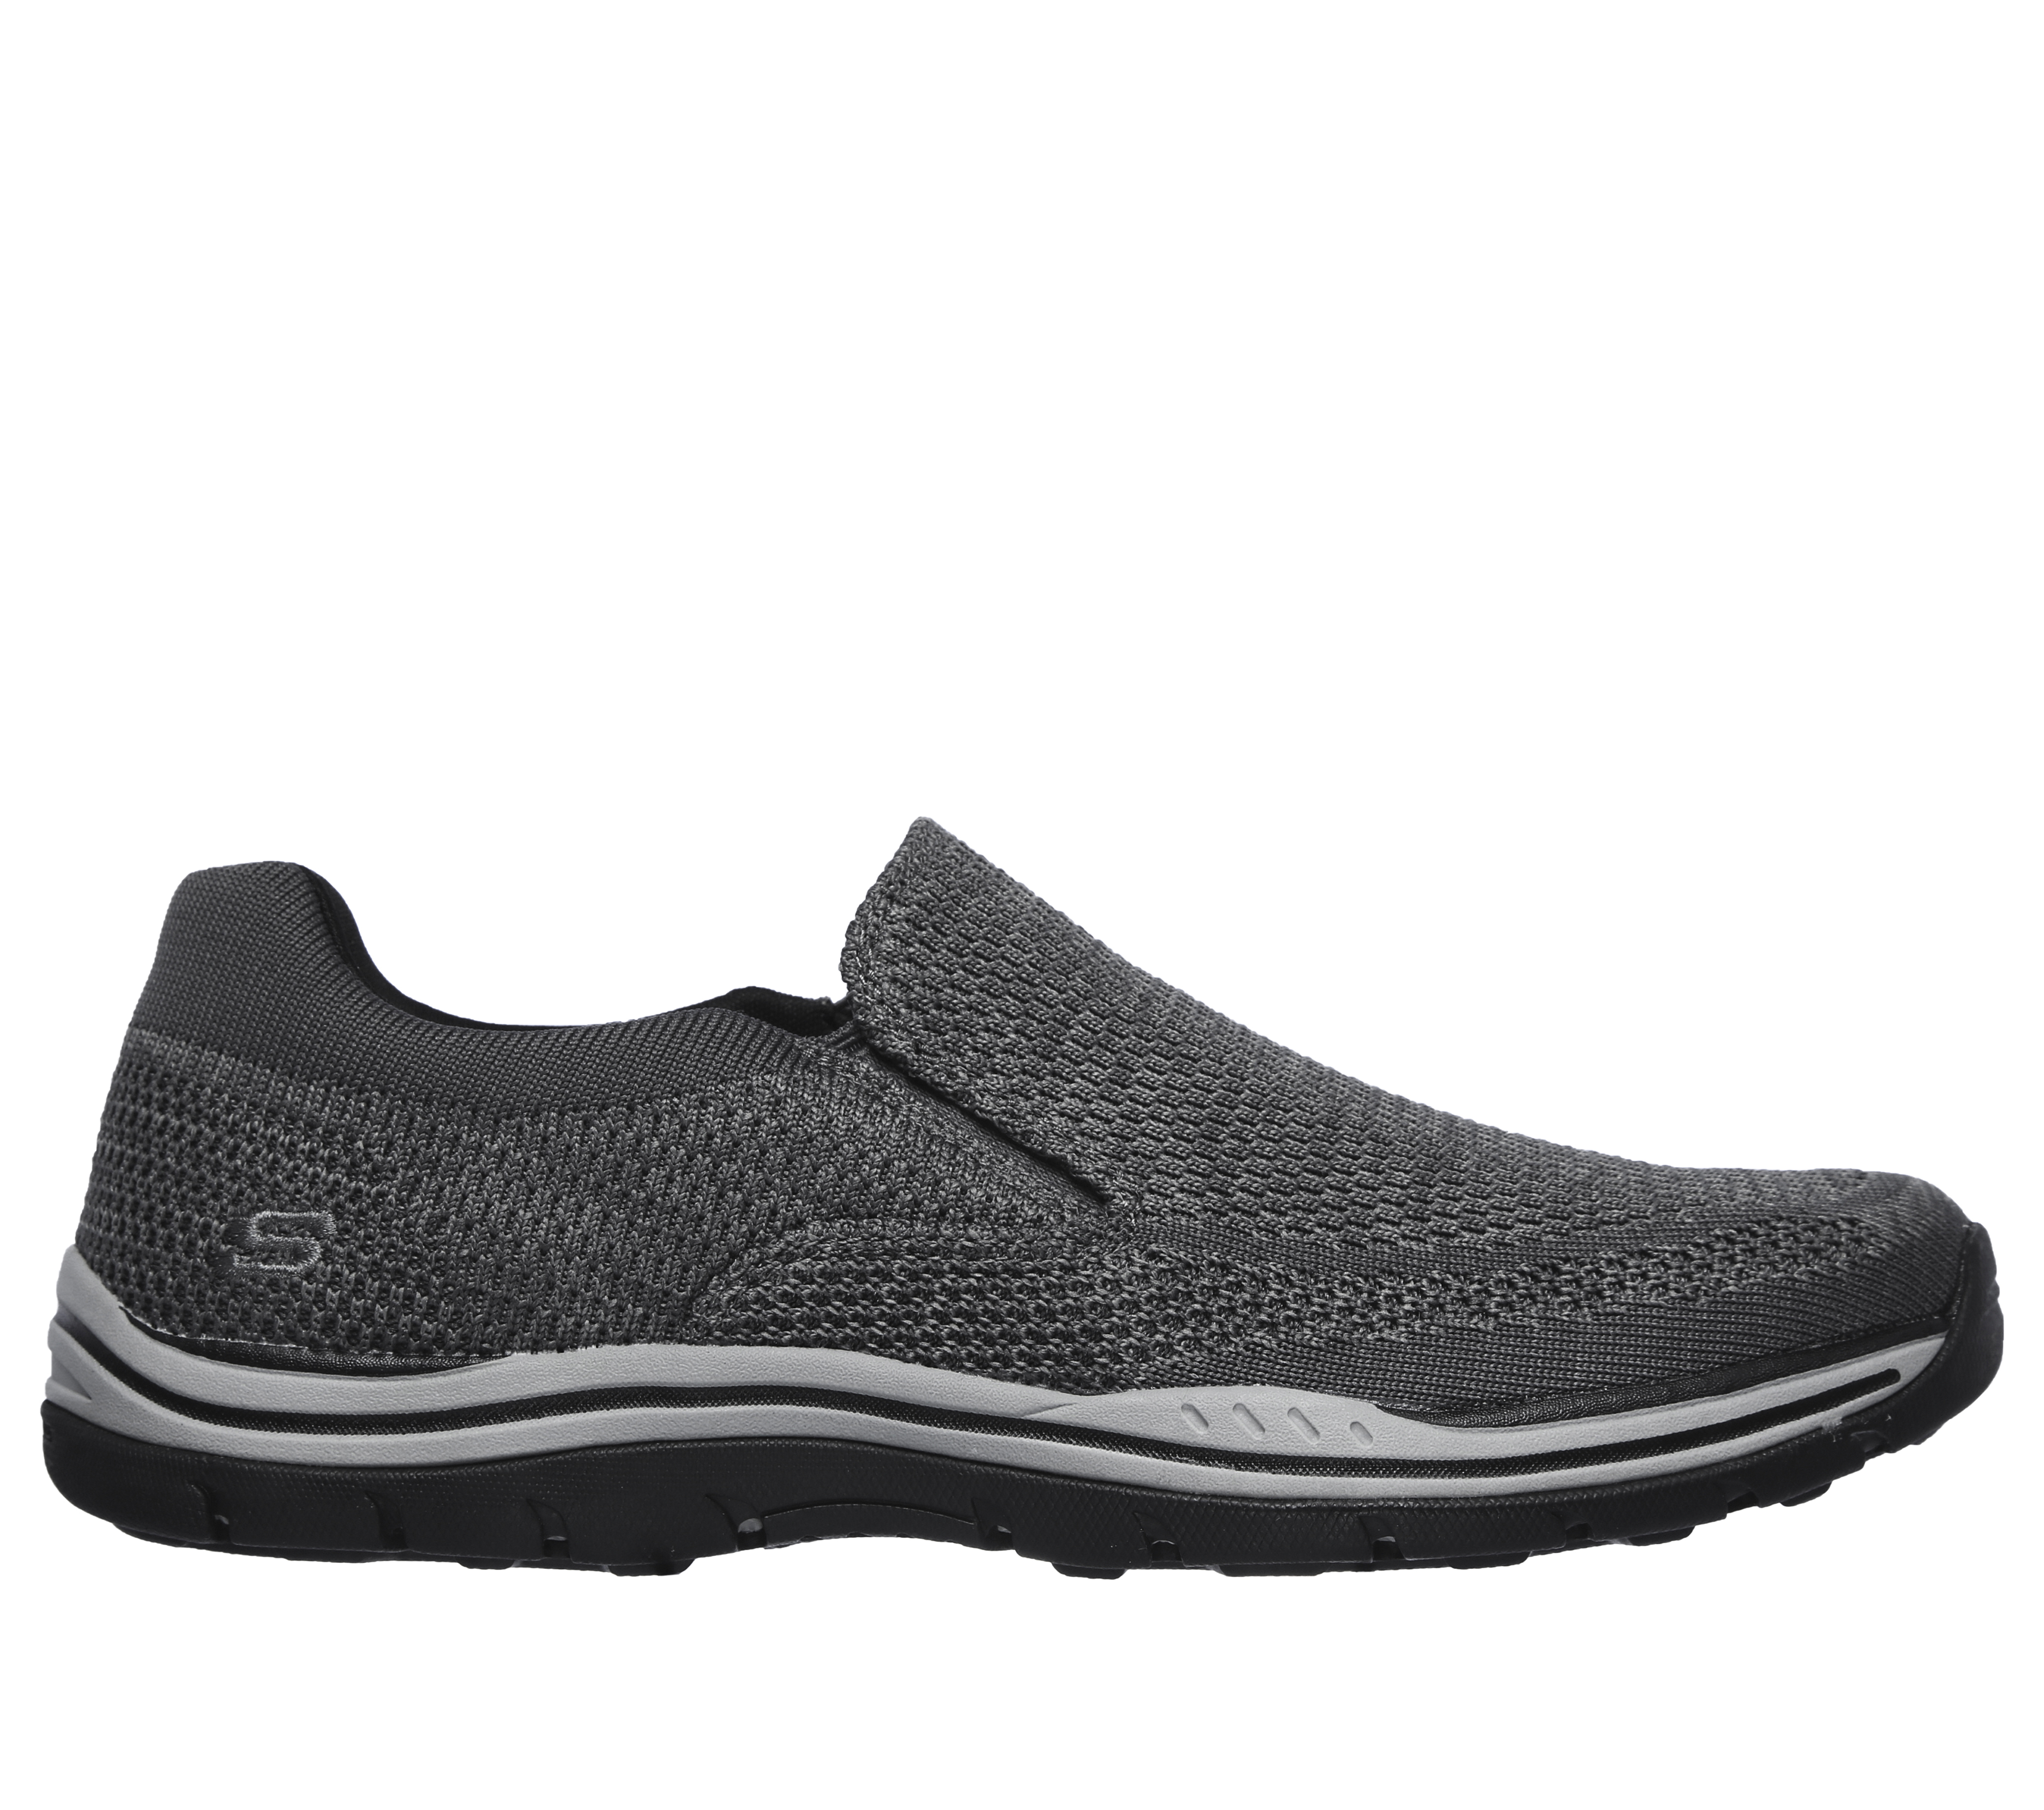 mostrar Convocar que te diviertas Relaxed Fit: Expected - Gomel | SKECHERS